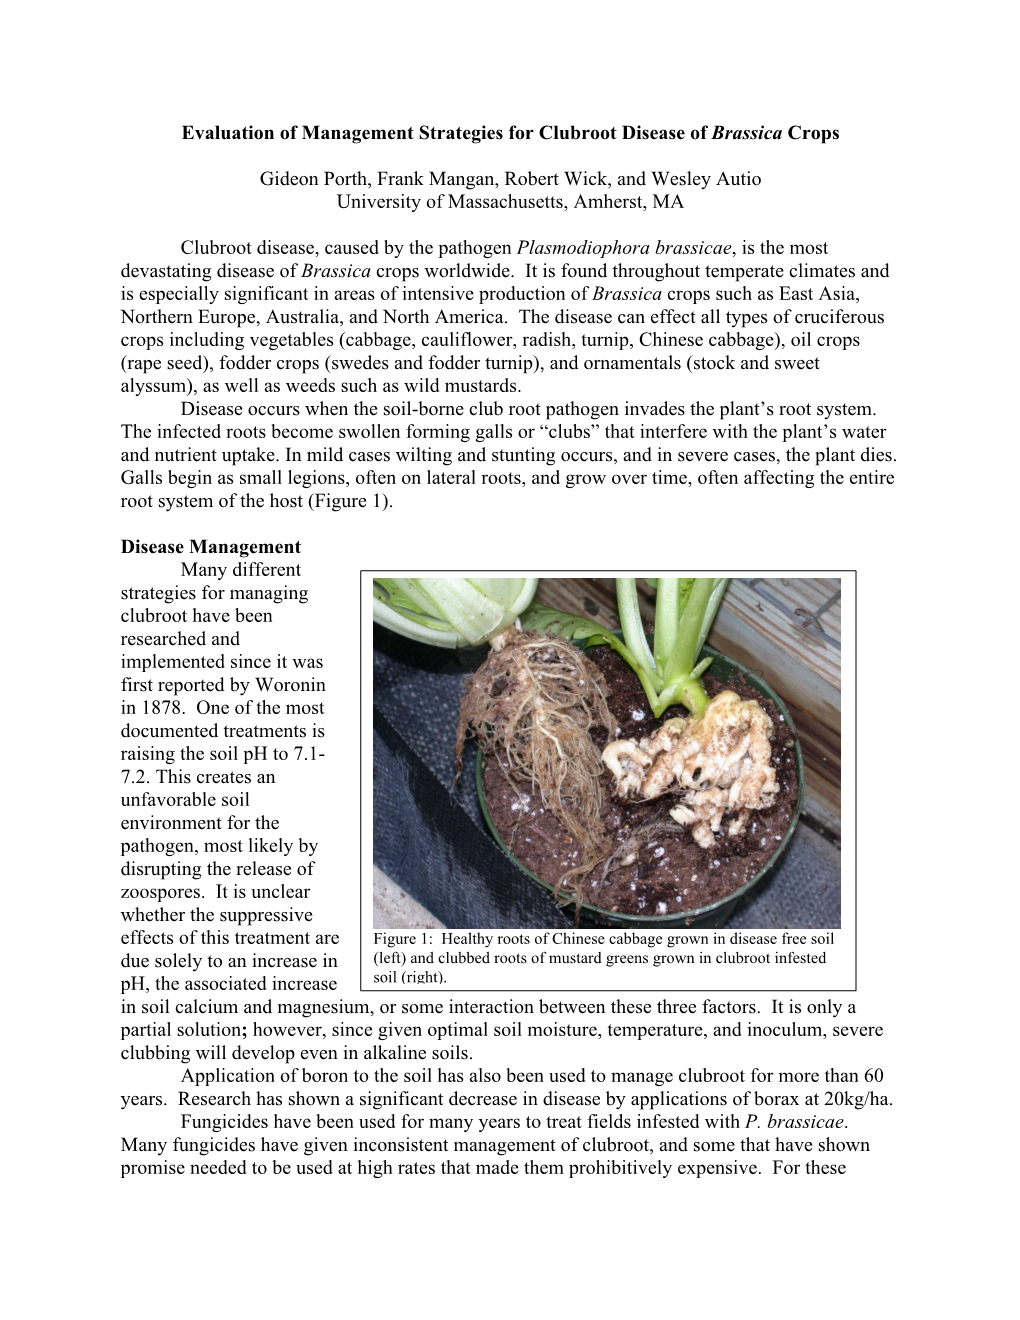 Evaluation of Management Strategies for Clubroot Disease of Brassica Crops